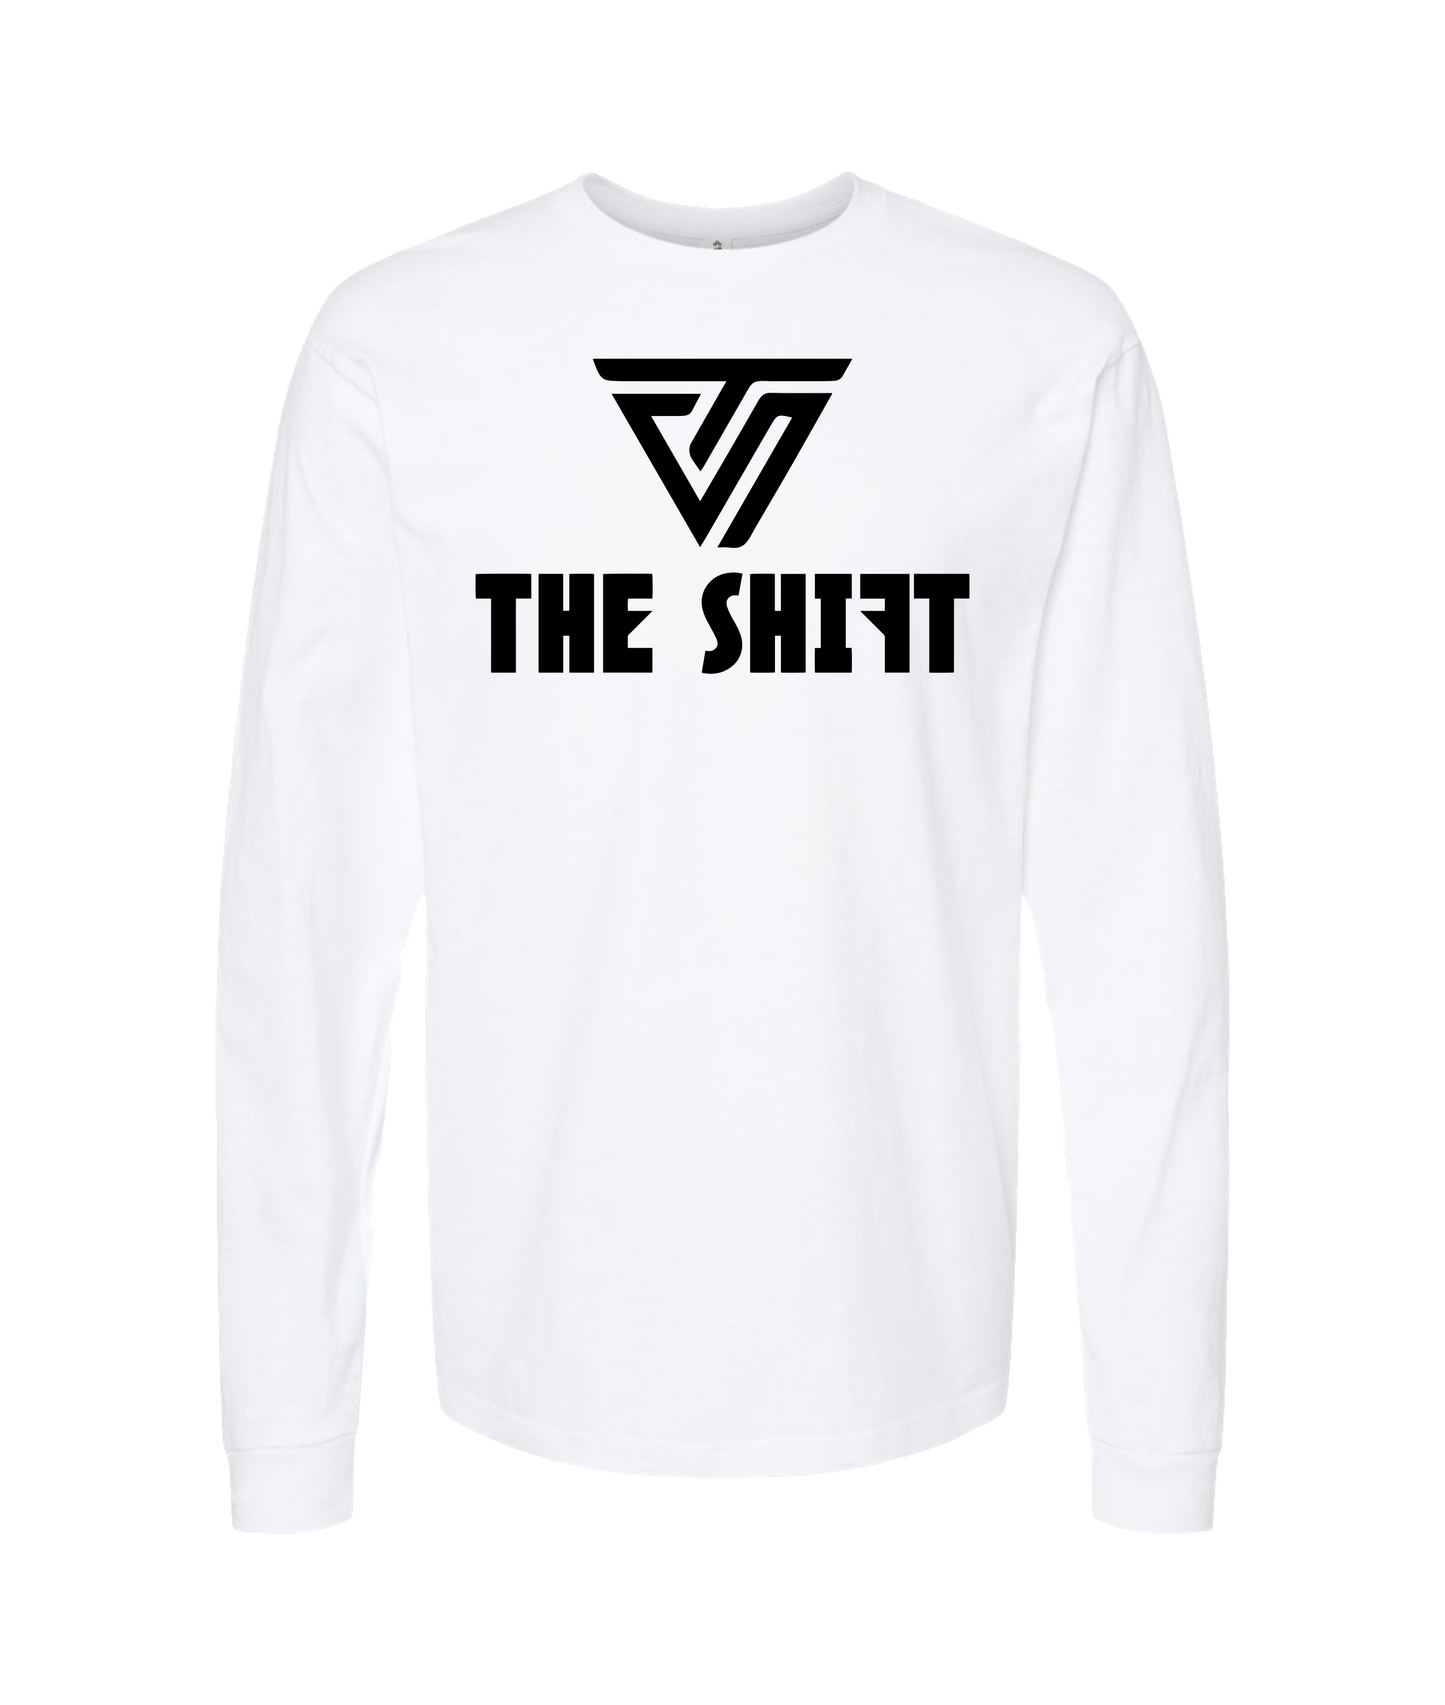 TheShift - Be The Shift - White Long Sleeve T